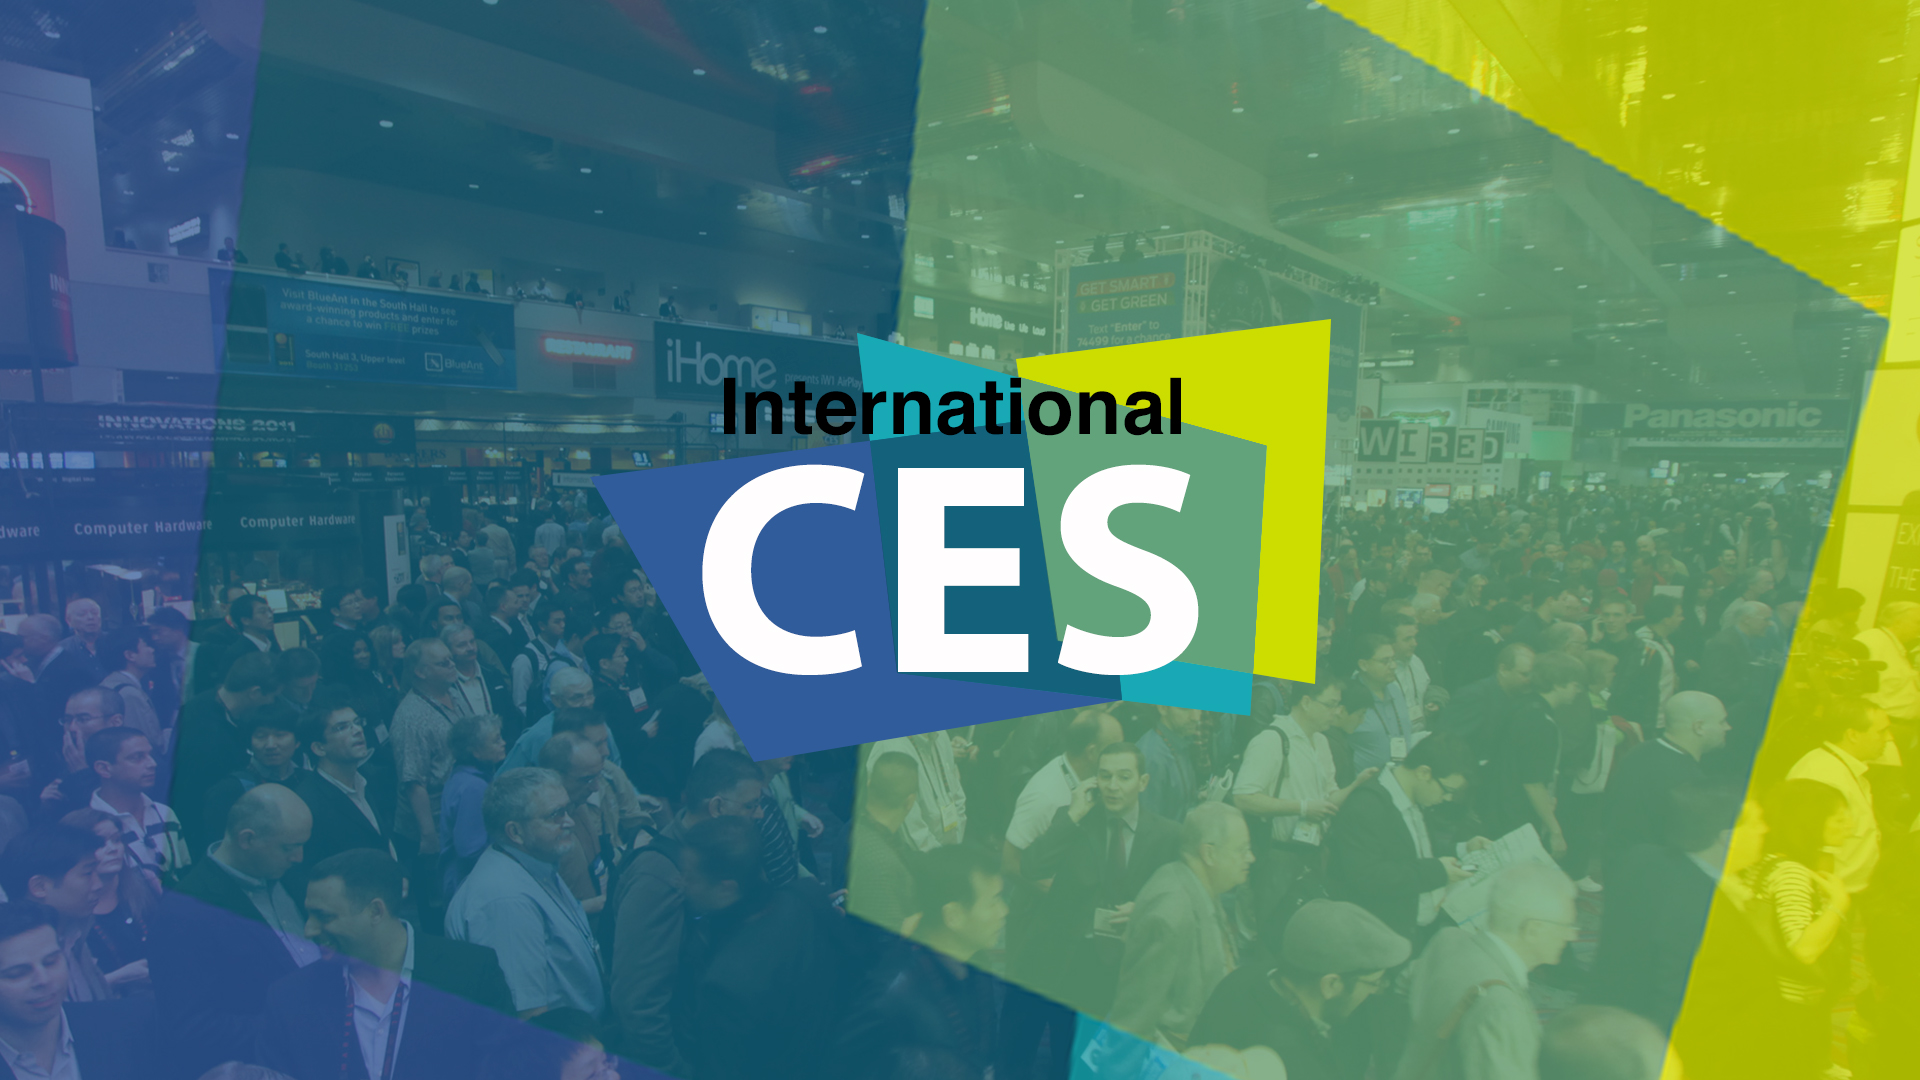 5 Reasons To Regret Missing CES 2015